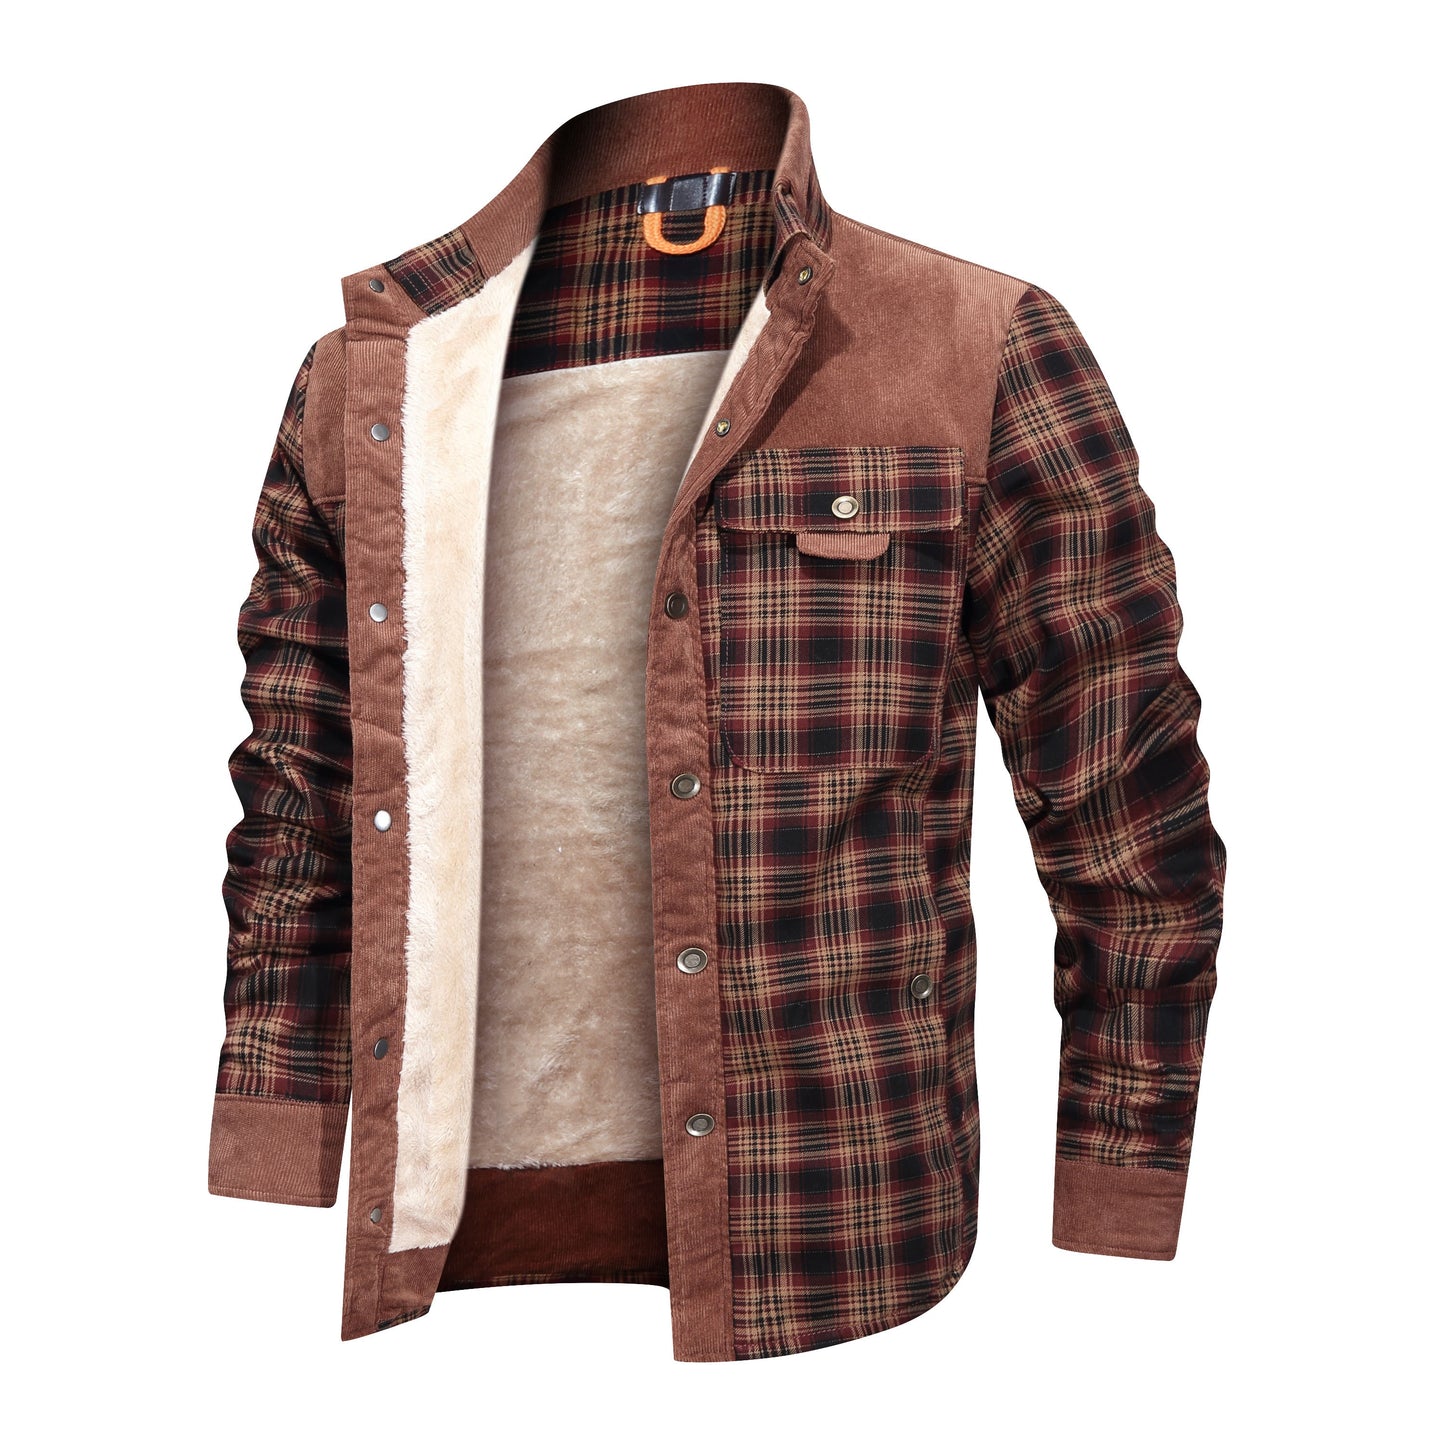 Thickened Shirt Jacket With Classic Plaid Fuzzy Fleece Lining Inside Design